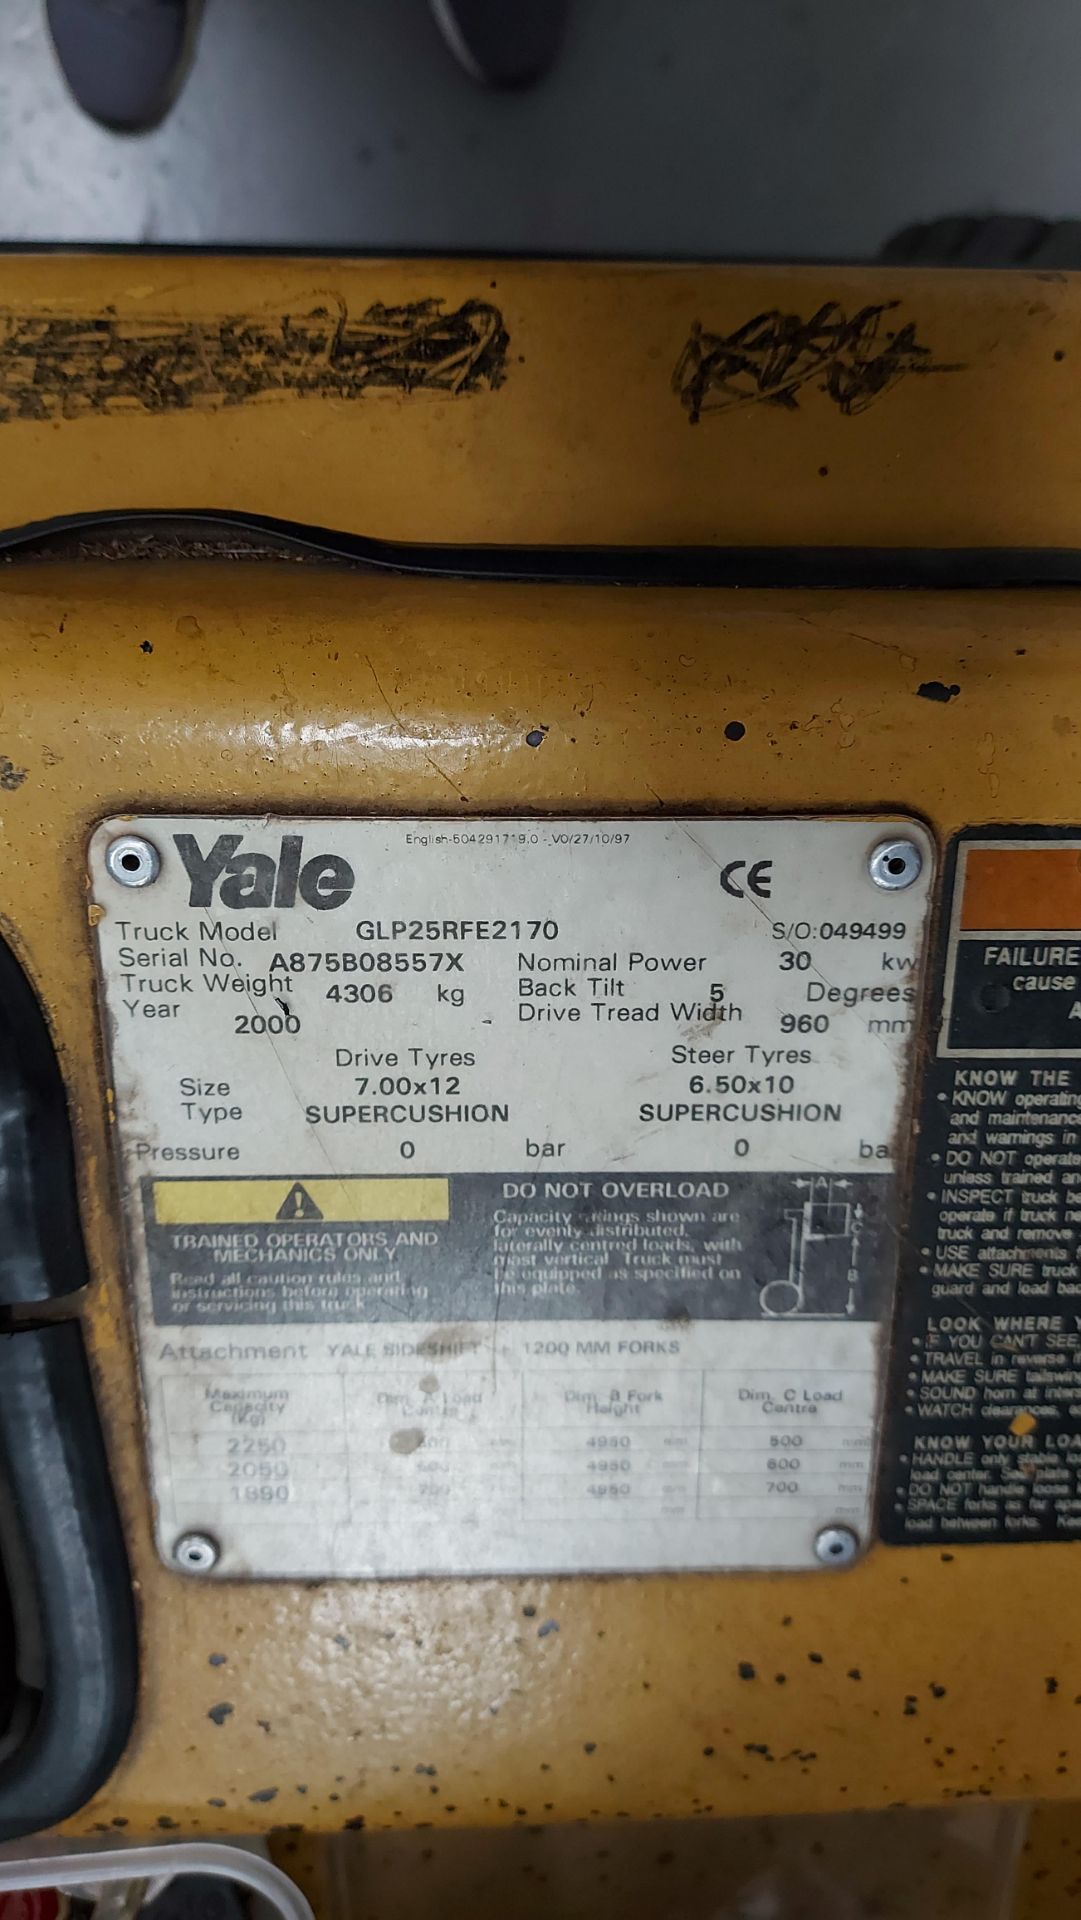 Yale GLP25RFE2170 Gas Forklift Truck. 2.5 Ton Capacity - Image 2 of 2